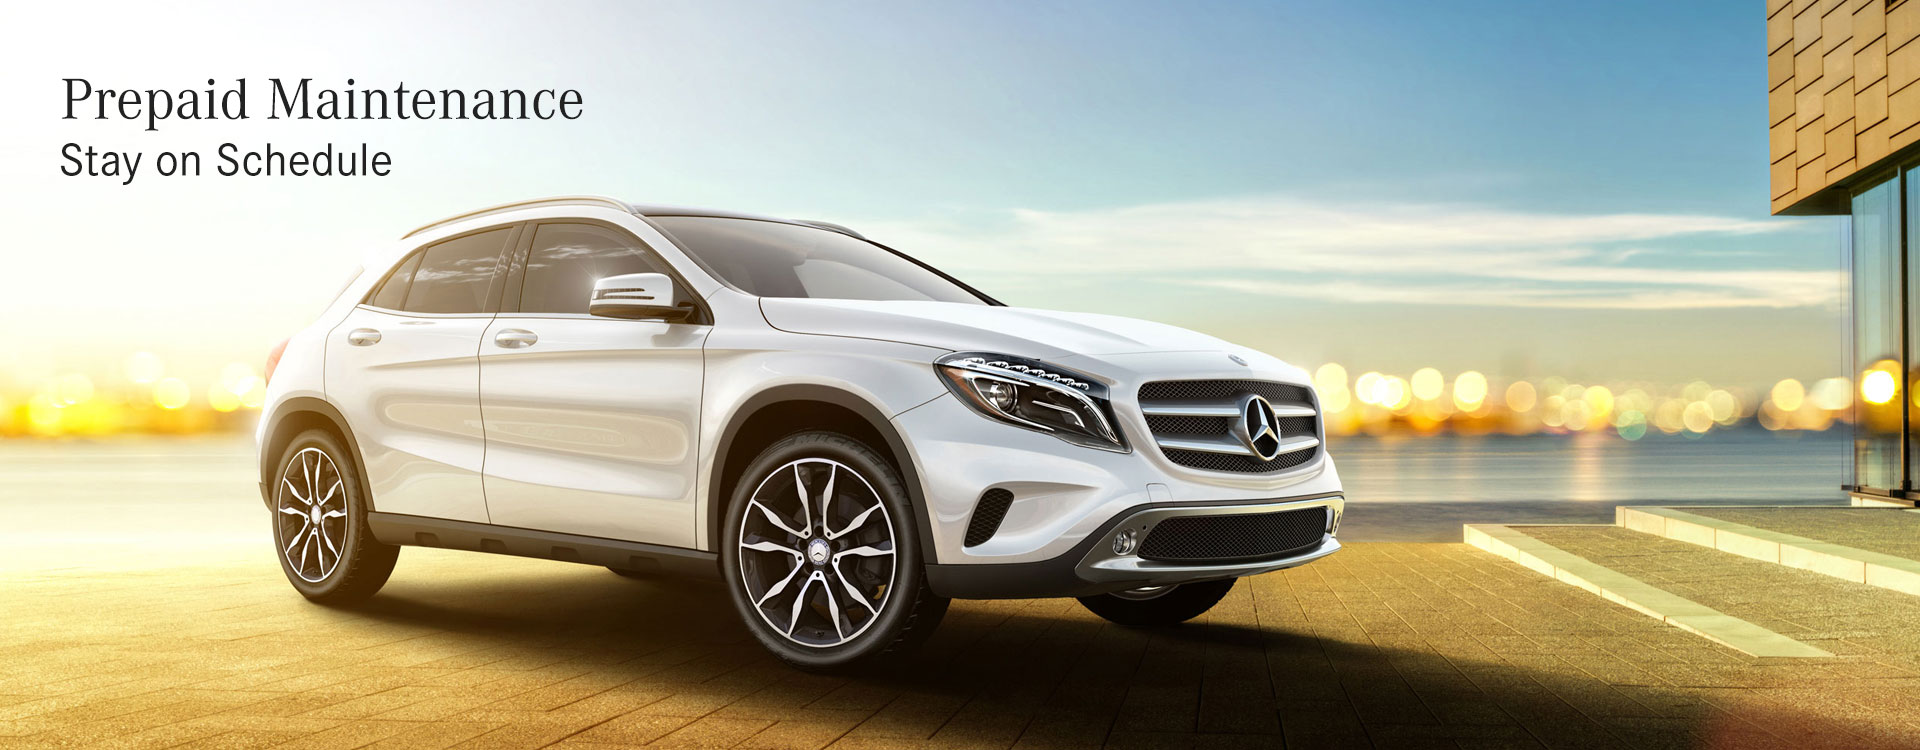 Mercedes benz extended warranty coverage #2